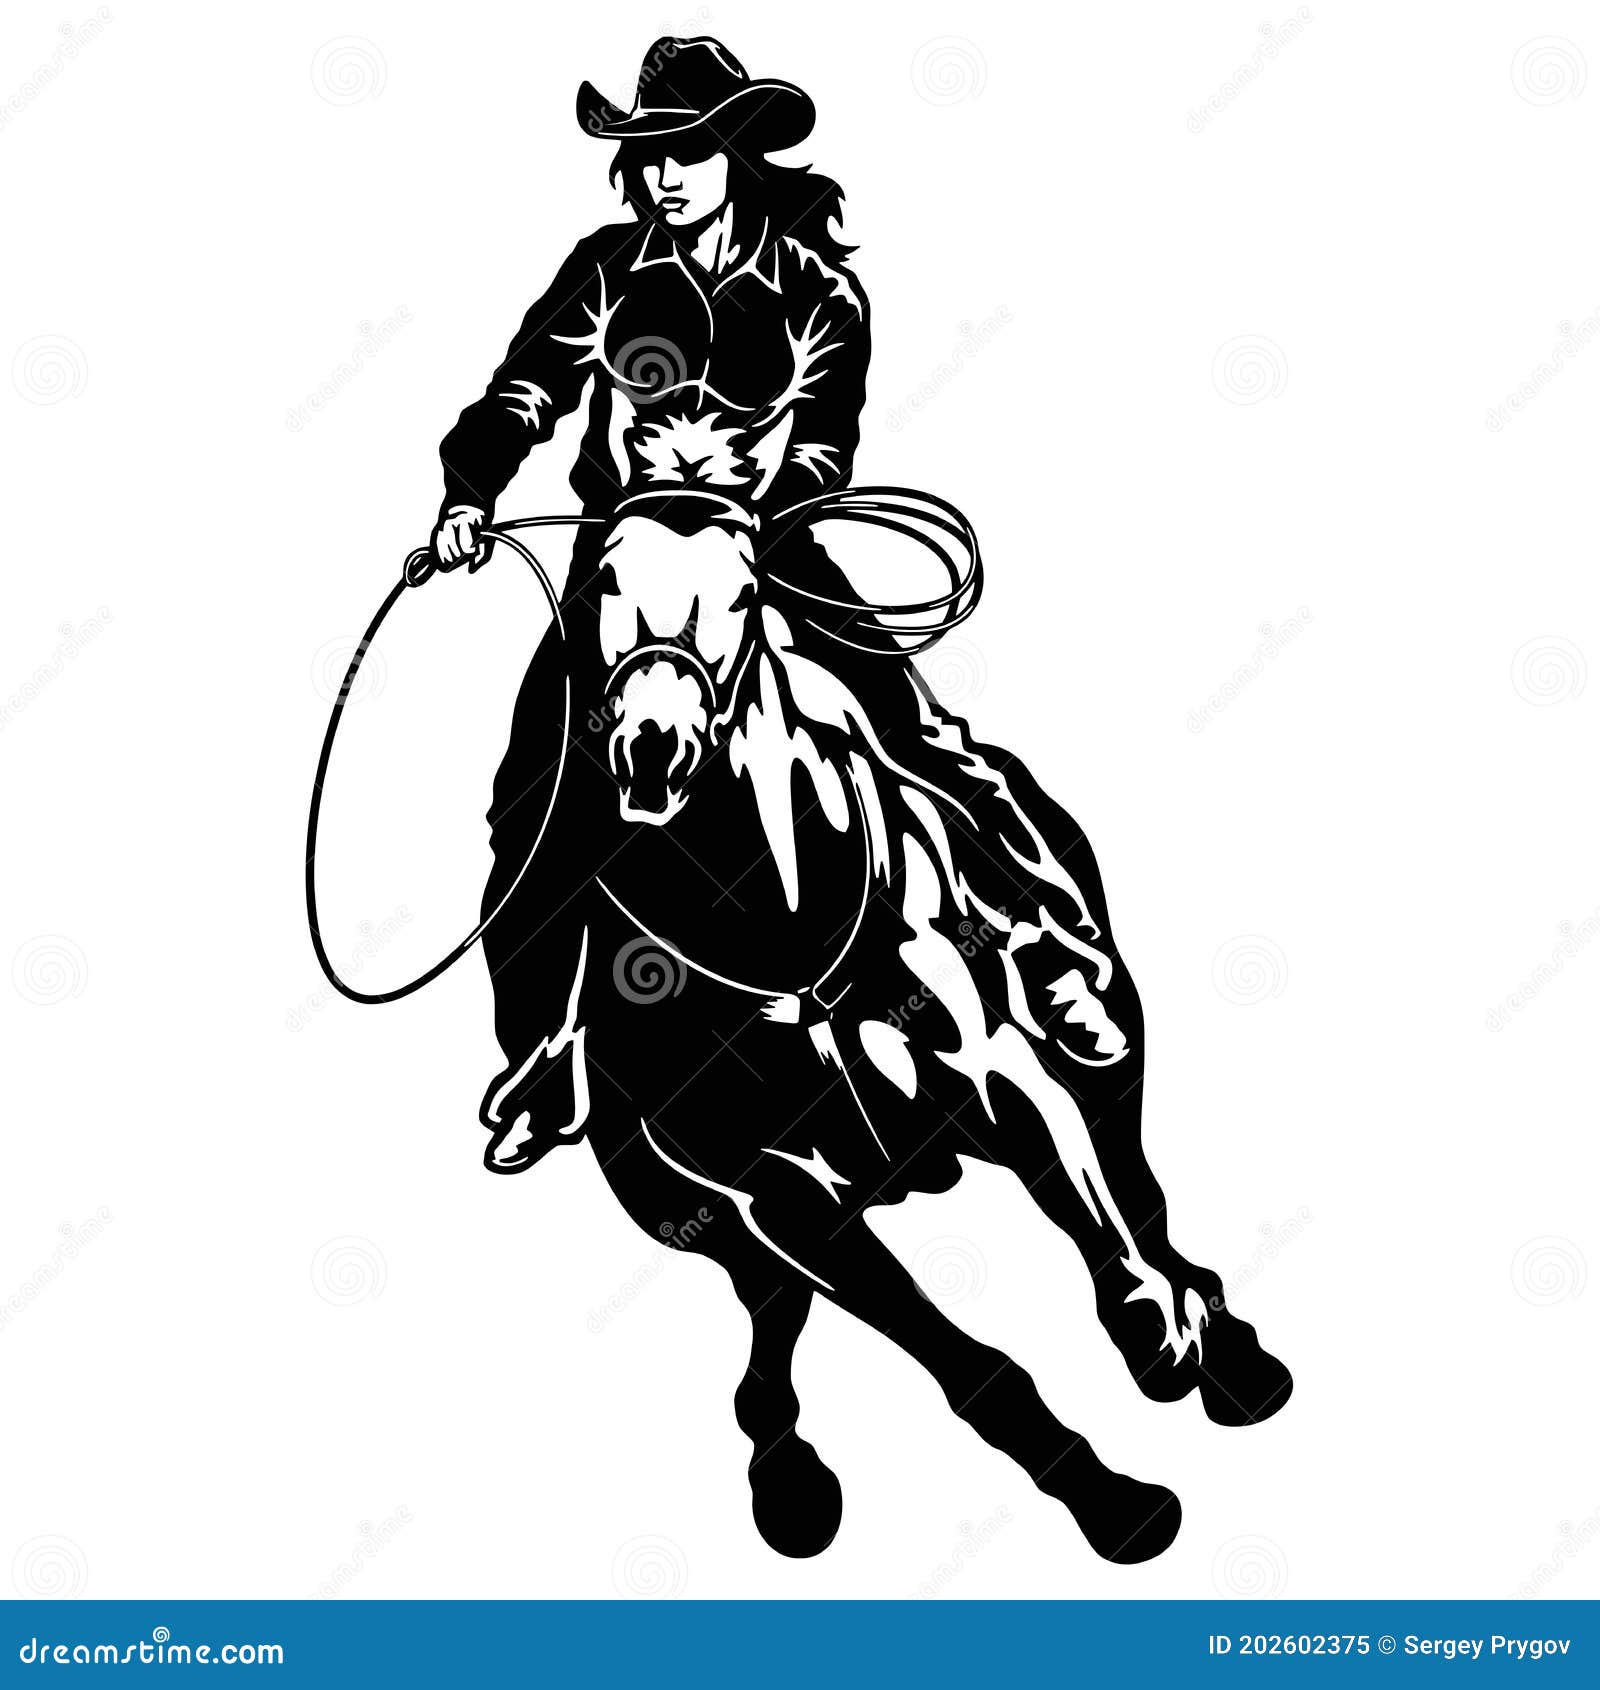 roping horse silhouette